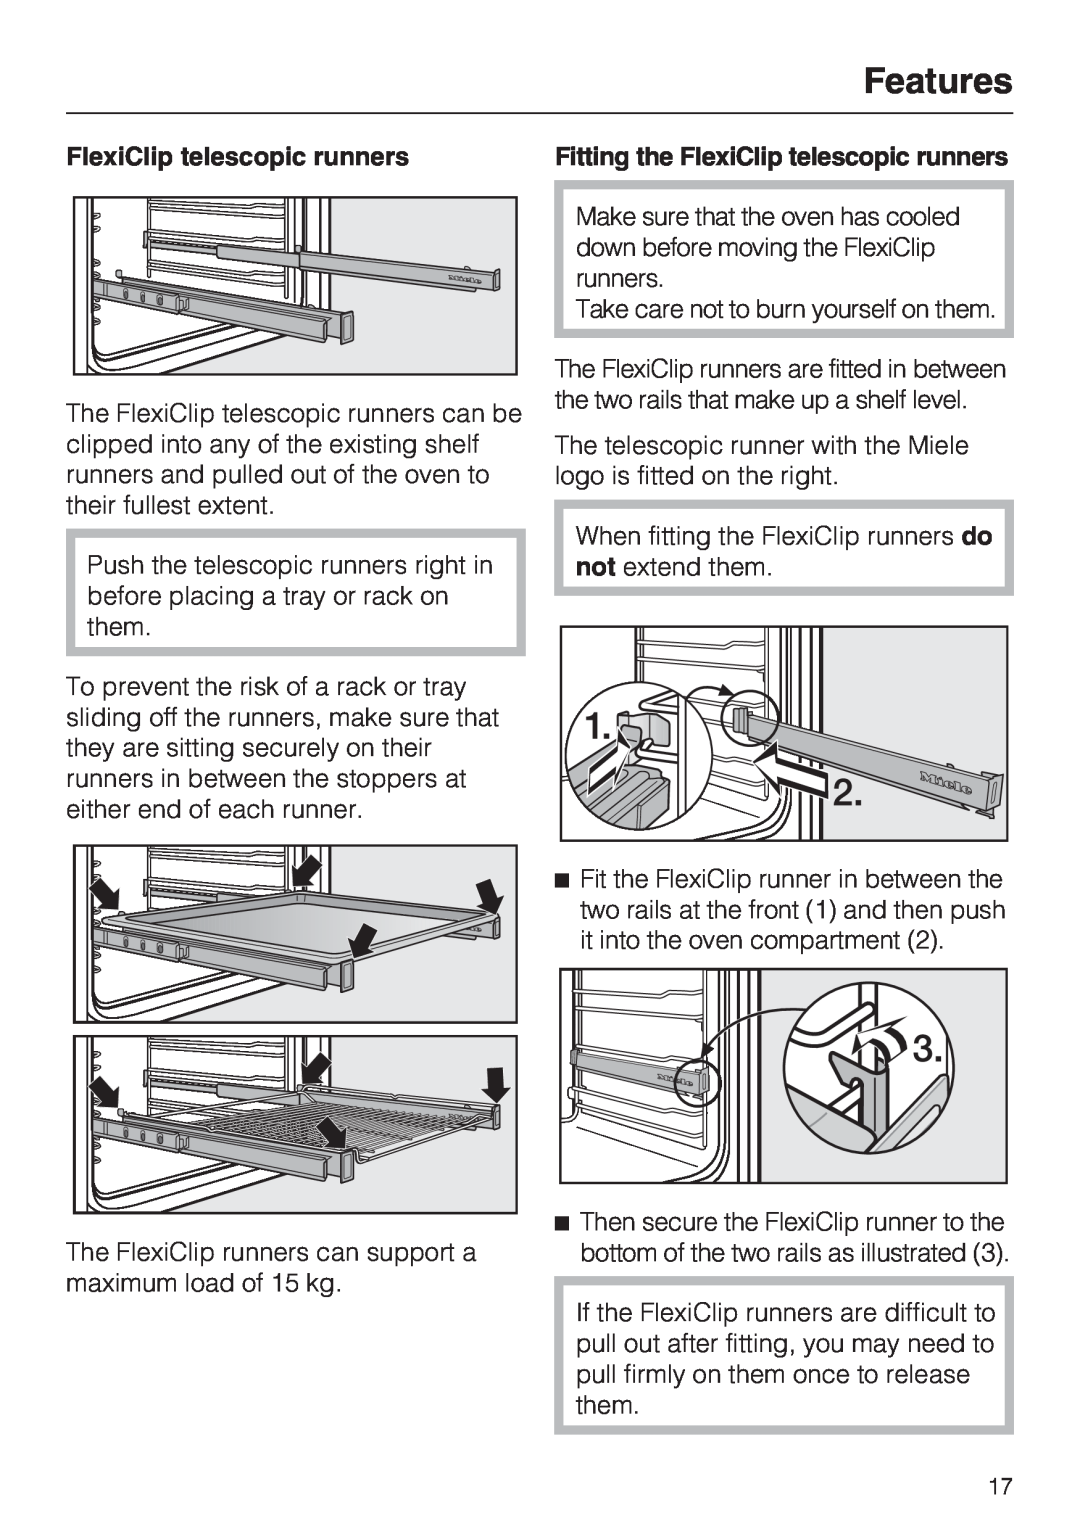 Miele H 5961 B installation instructions FlexiClip telescopic runners, Features 